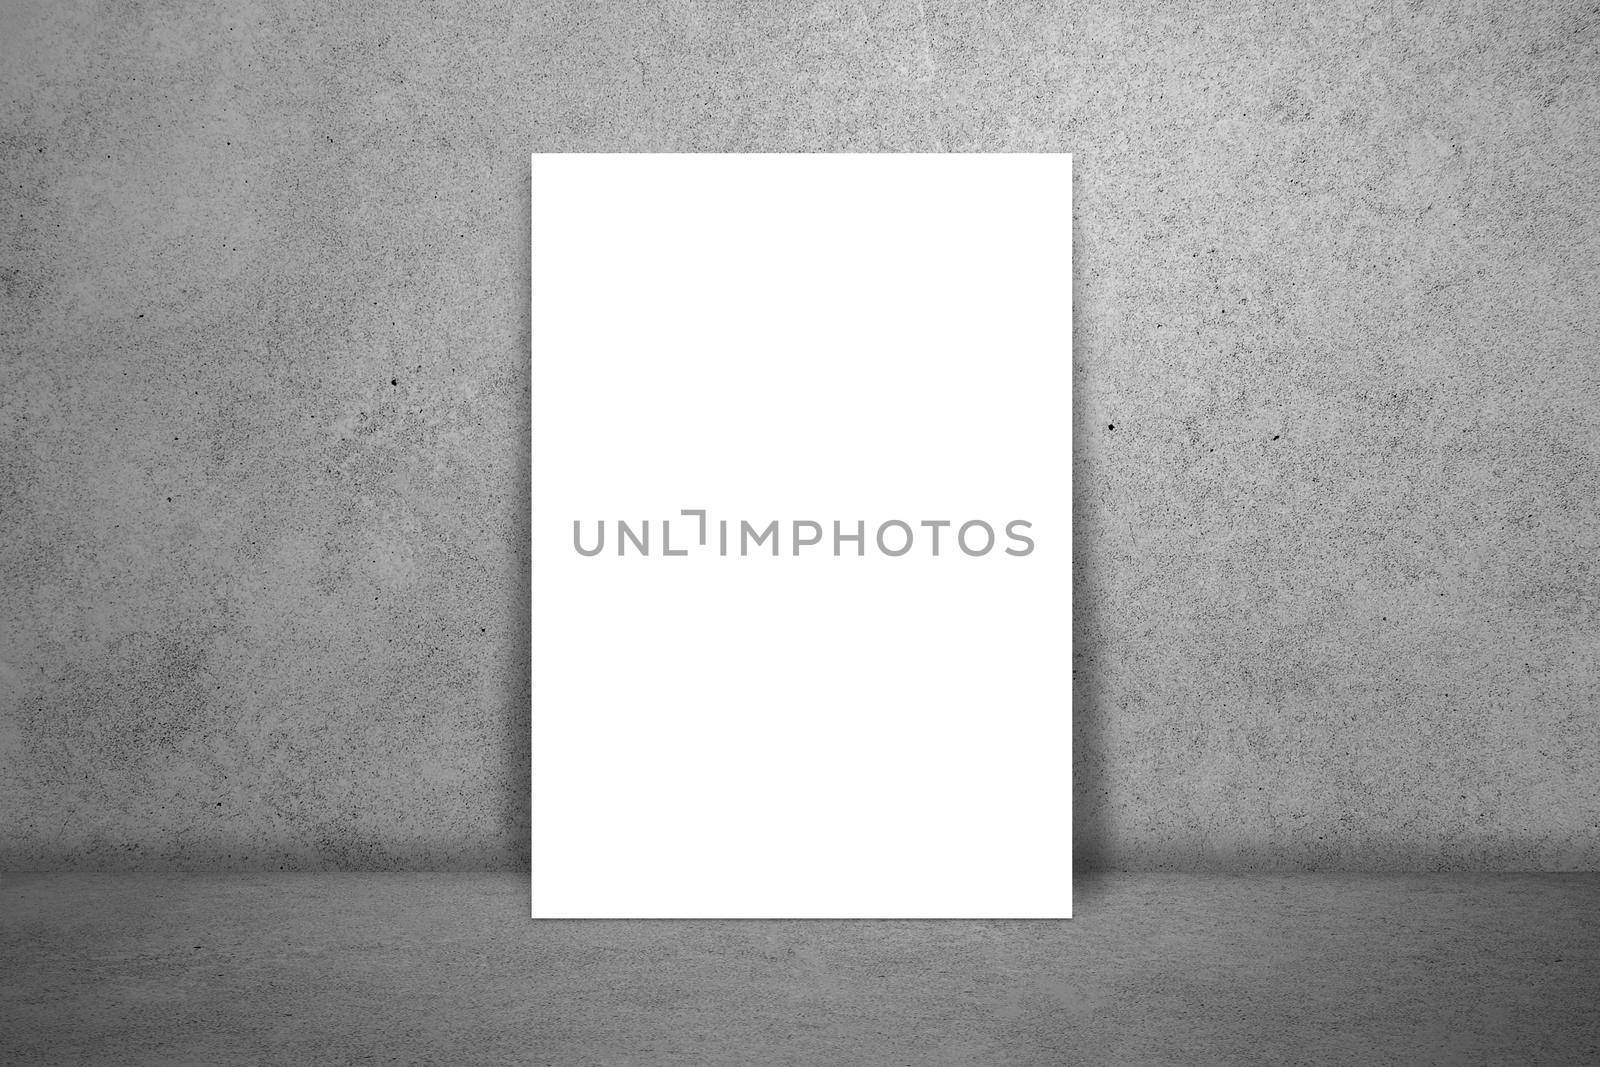 Mockup template, paper white on texture background empty for presentation or ads, elements for advertising, business branding, board blank for design, canvas print or card, object art.